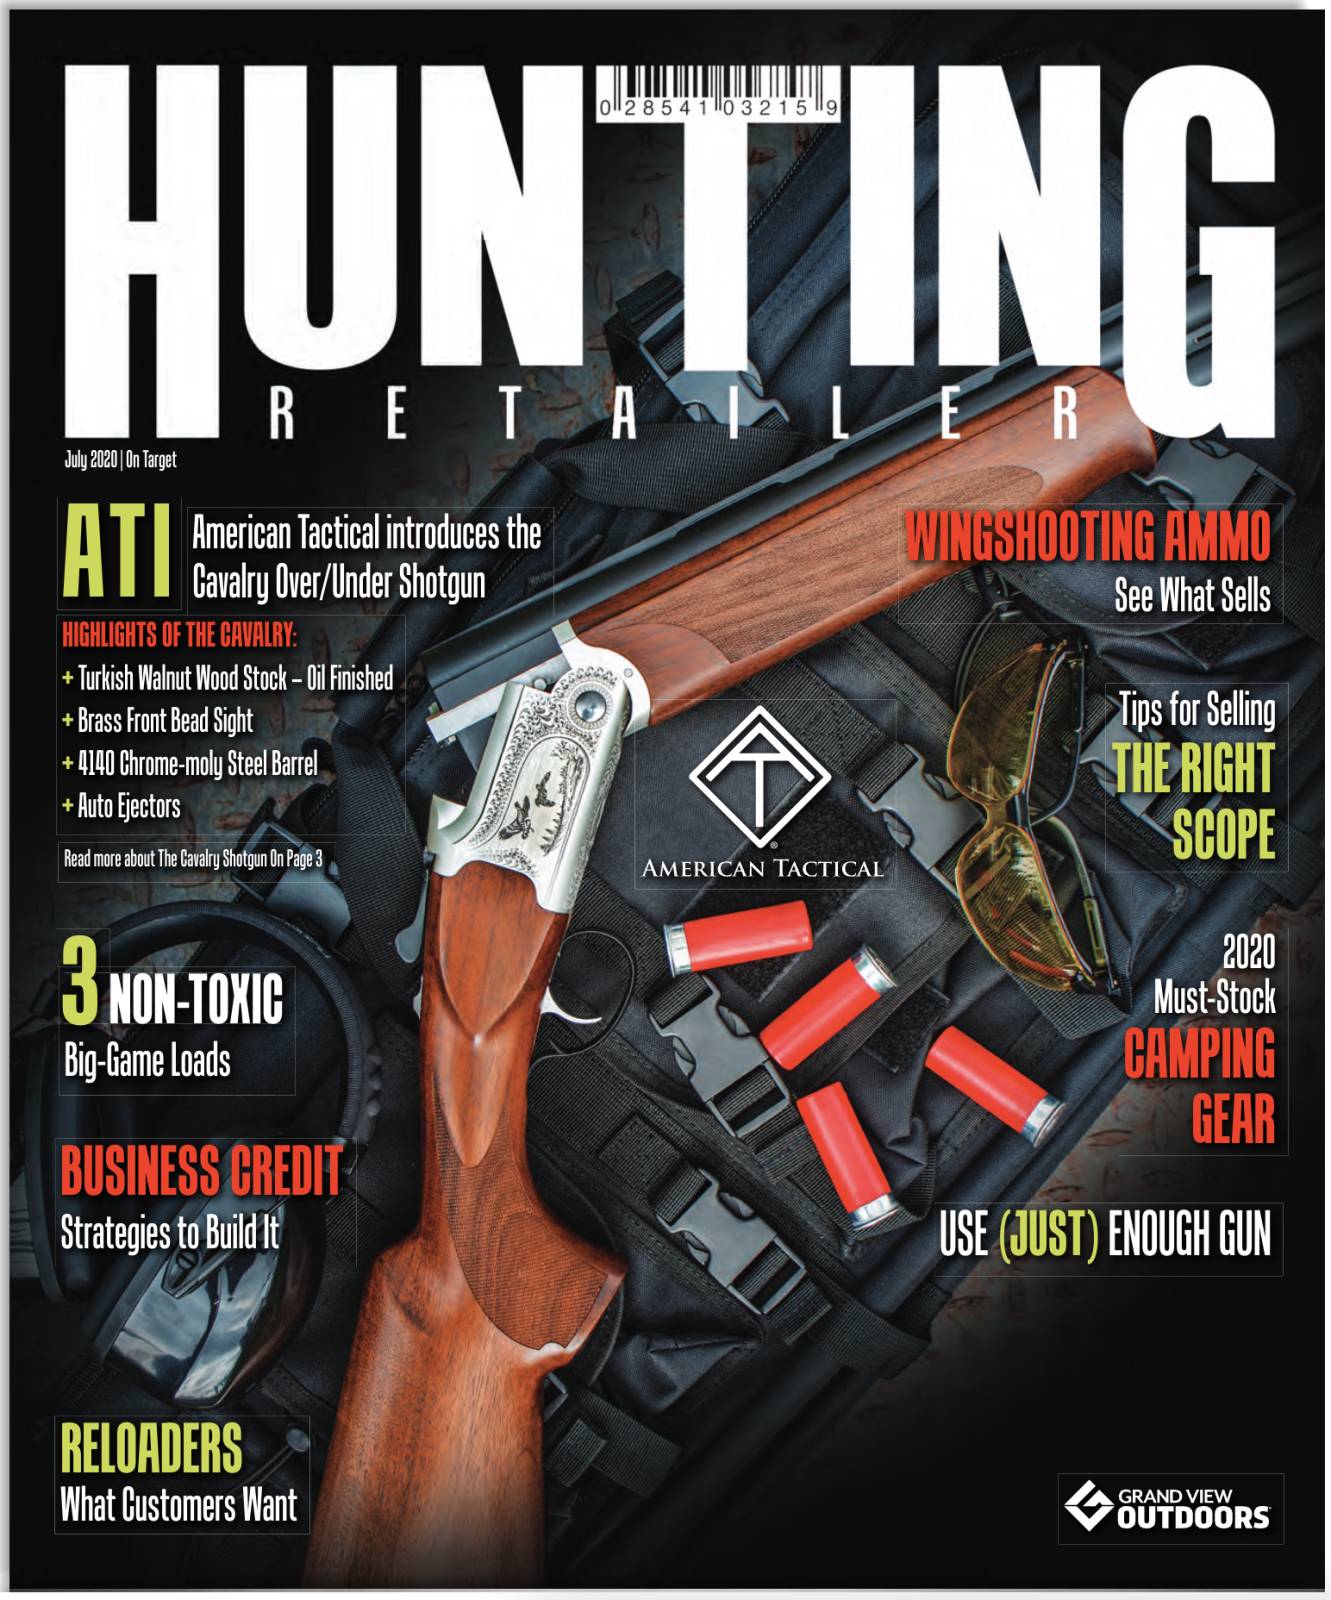 Inside the July 2020 E-Zine of Hunting Retailer